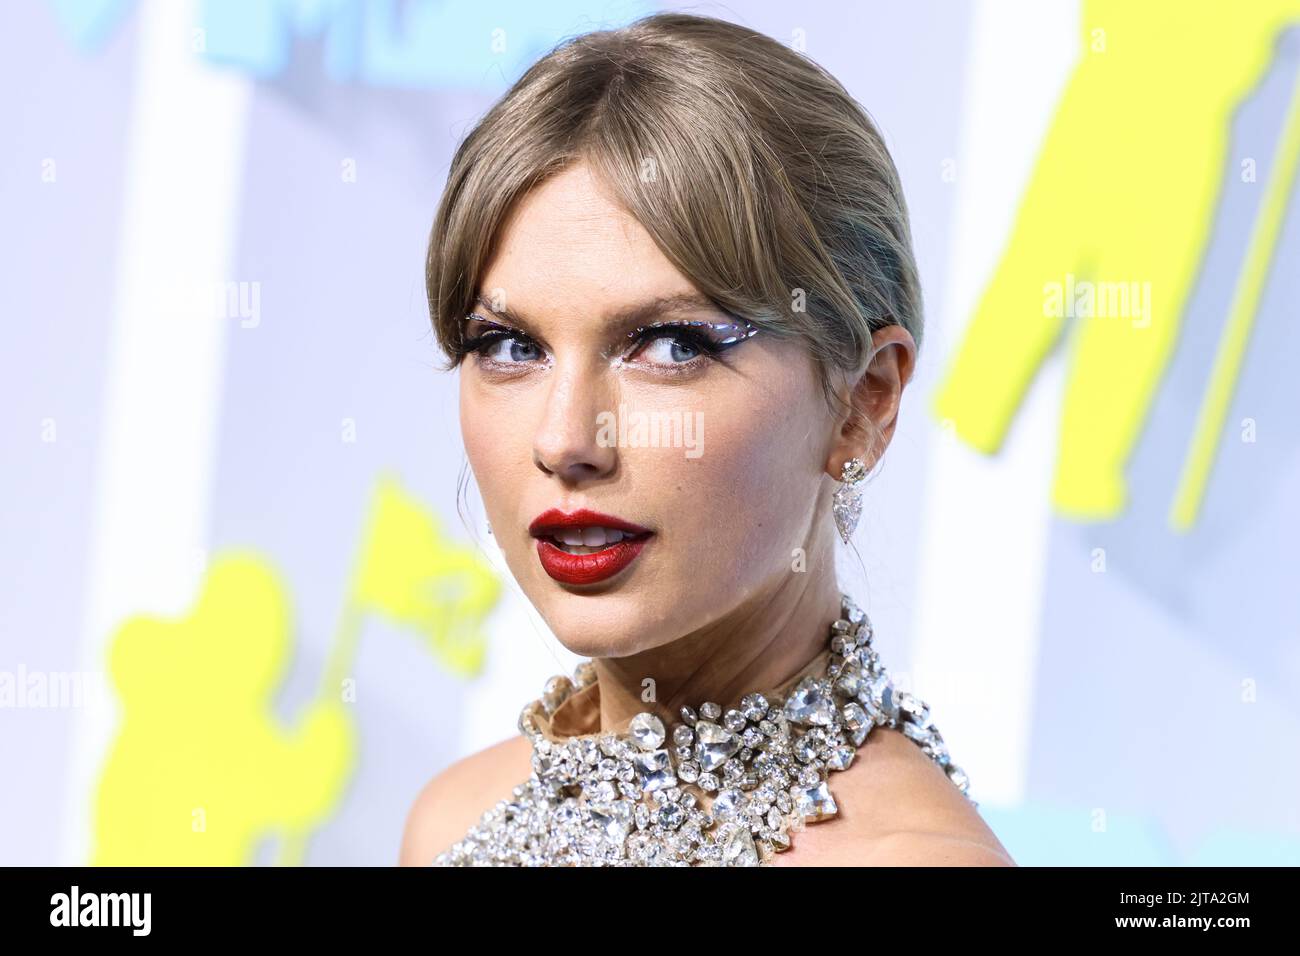 Newark, USA. 28th Aug, 2022. NEWARK, NEW JERSEY, USA - AUGUST 28: Taylor Swift wearing an Oscar de la Renta dress, Christian Louboutin shoes, and Lorraine Schwartz jewelry arrives at the 2022 MTV Video Music Awards held at the Prudential Center on August 28, 2022 in Newark, New Jersey, USA. (Photo by Xavier Collin/Image Press Agency) Credit: Image Press Agency/Alamy Live News Stock Photo